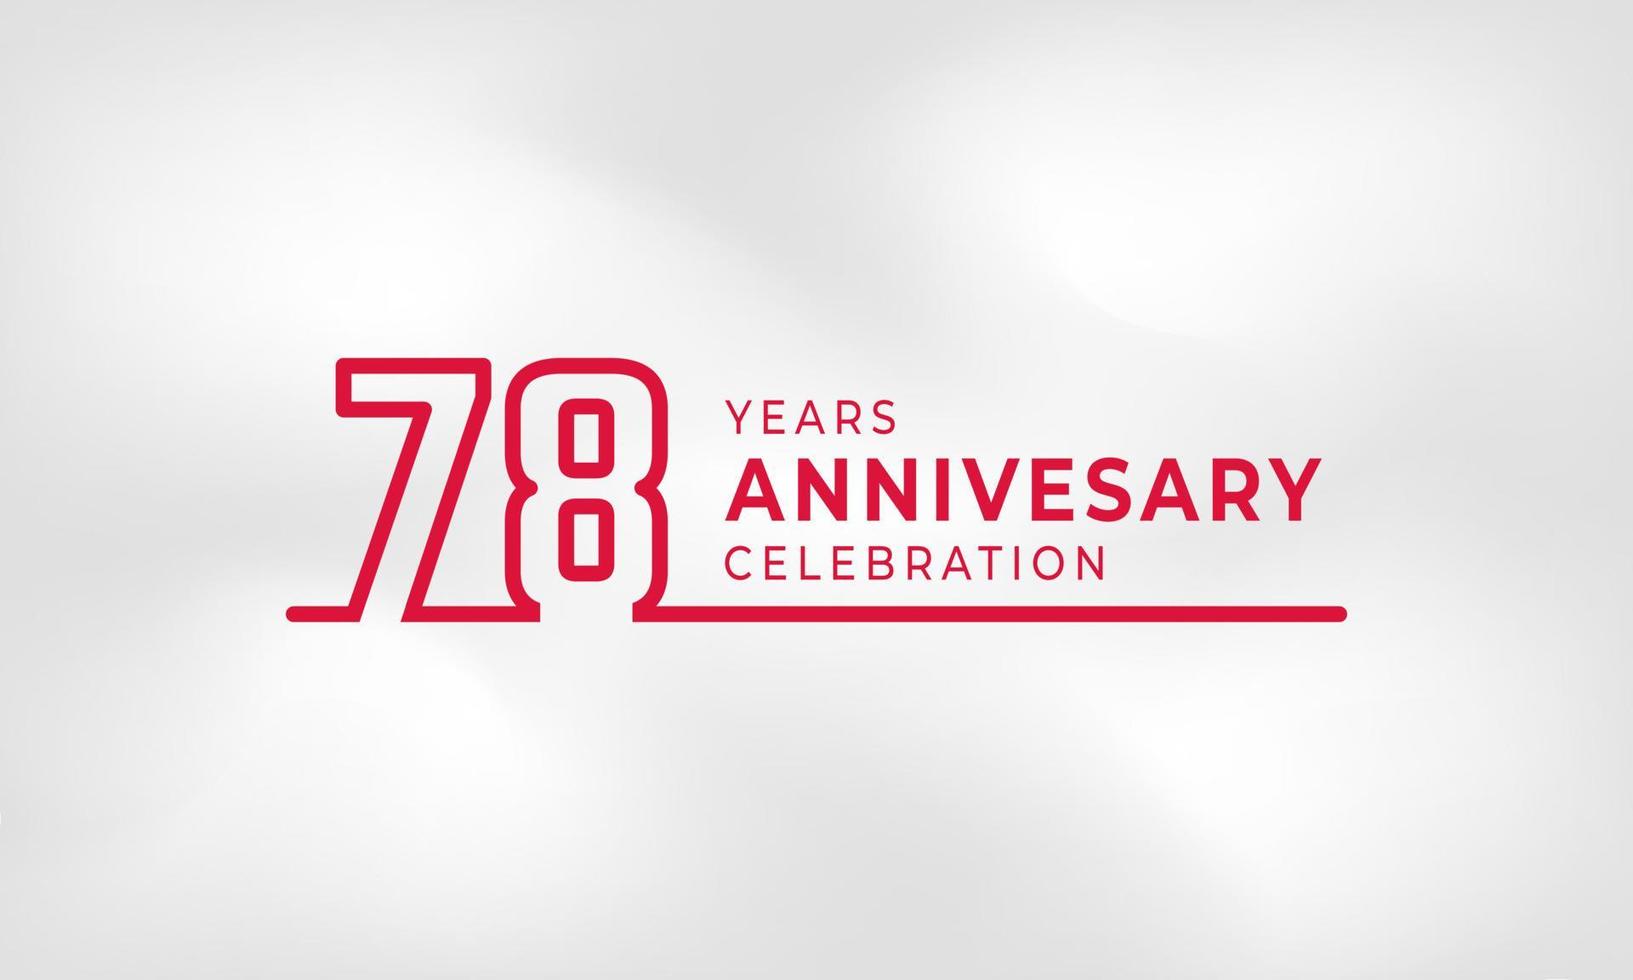 78 Year Anniversary Celebration Linked Logotype Outline Number Red Color for Celebration Event, Wedding, Greeting card, and Invitation Isolated on White Texture Background vector